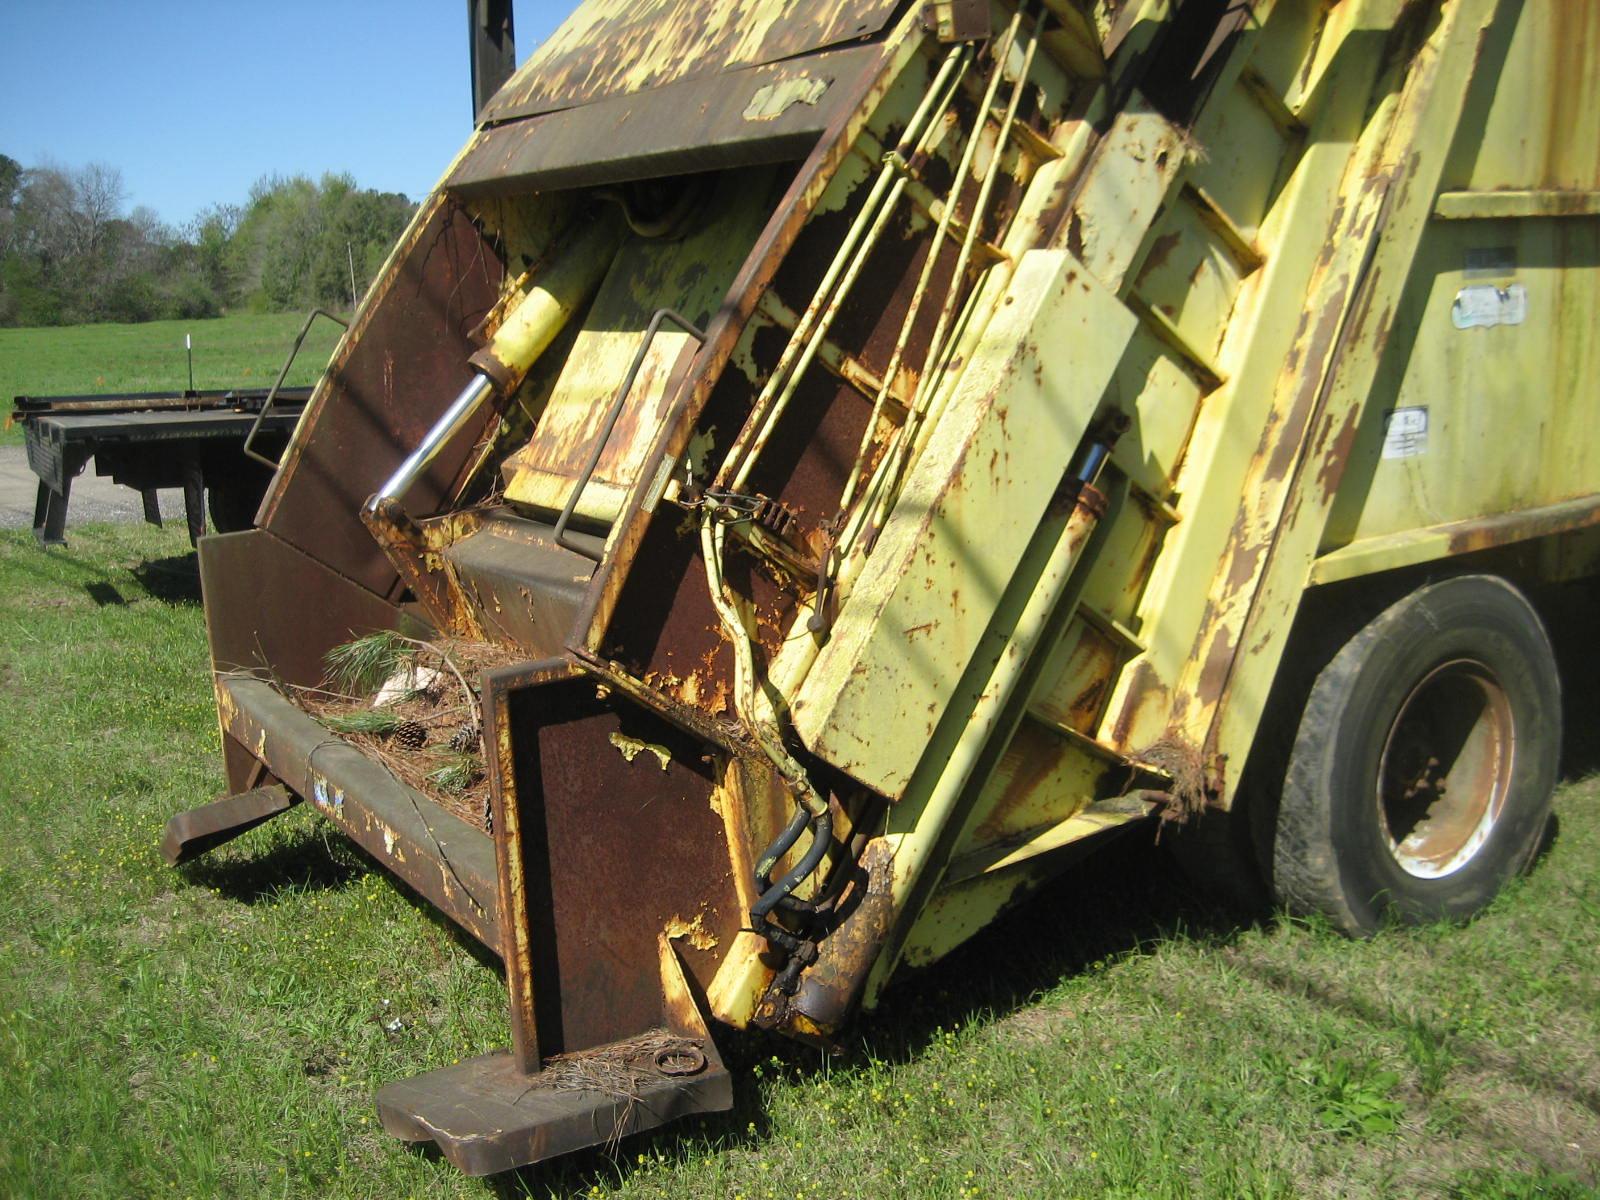 1981 GMC Topkick Garbage Truck, s/n 1GDP7D1Y3BV601068: S/A, Cat 3208 Eng.,